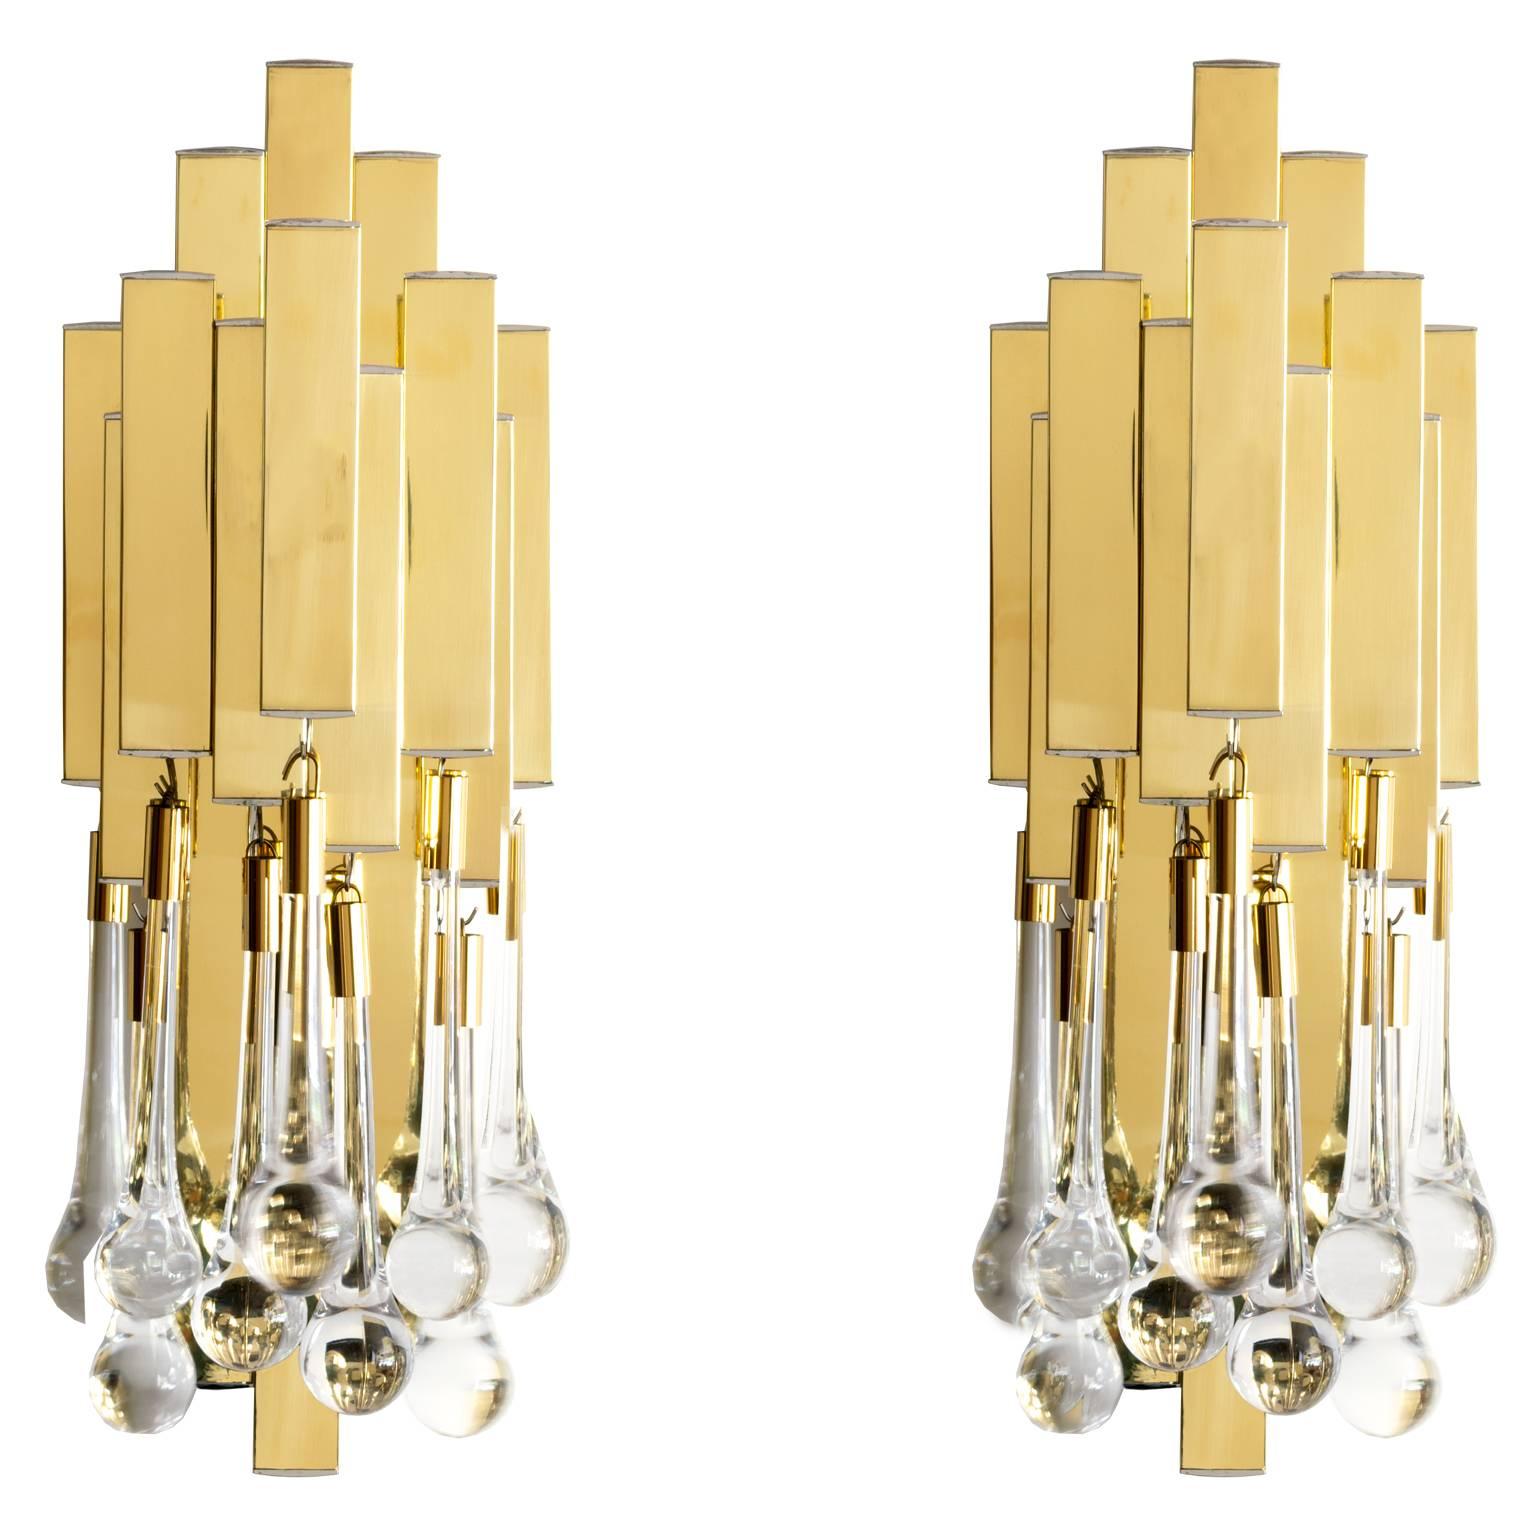 Pair of Mid-Century Modern Brass and Crystal Sconces by Lumica, Barcelona Spain For Sale